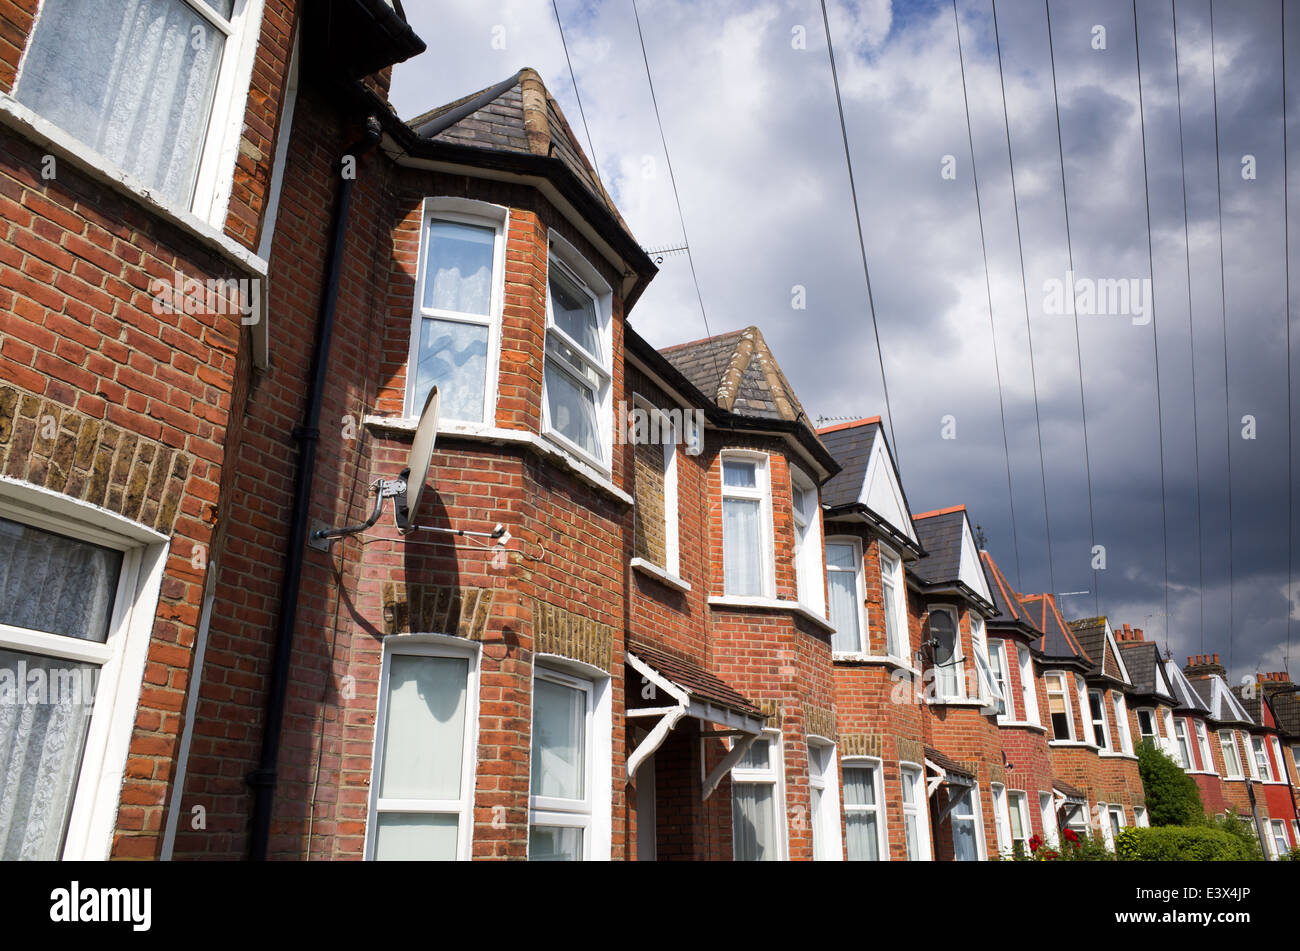 Row of terraced houses under overcast and stormy sky, London, England, UK Stock Photo